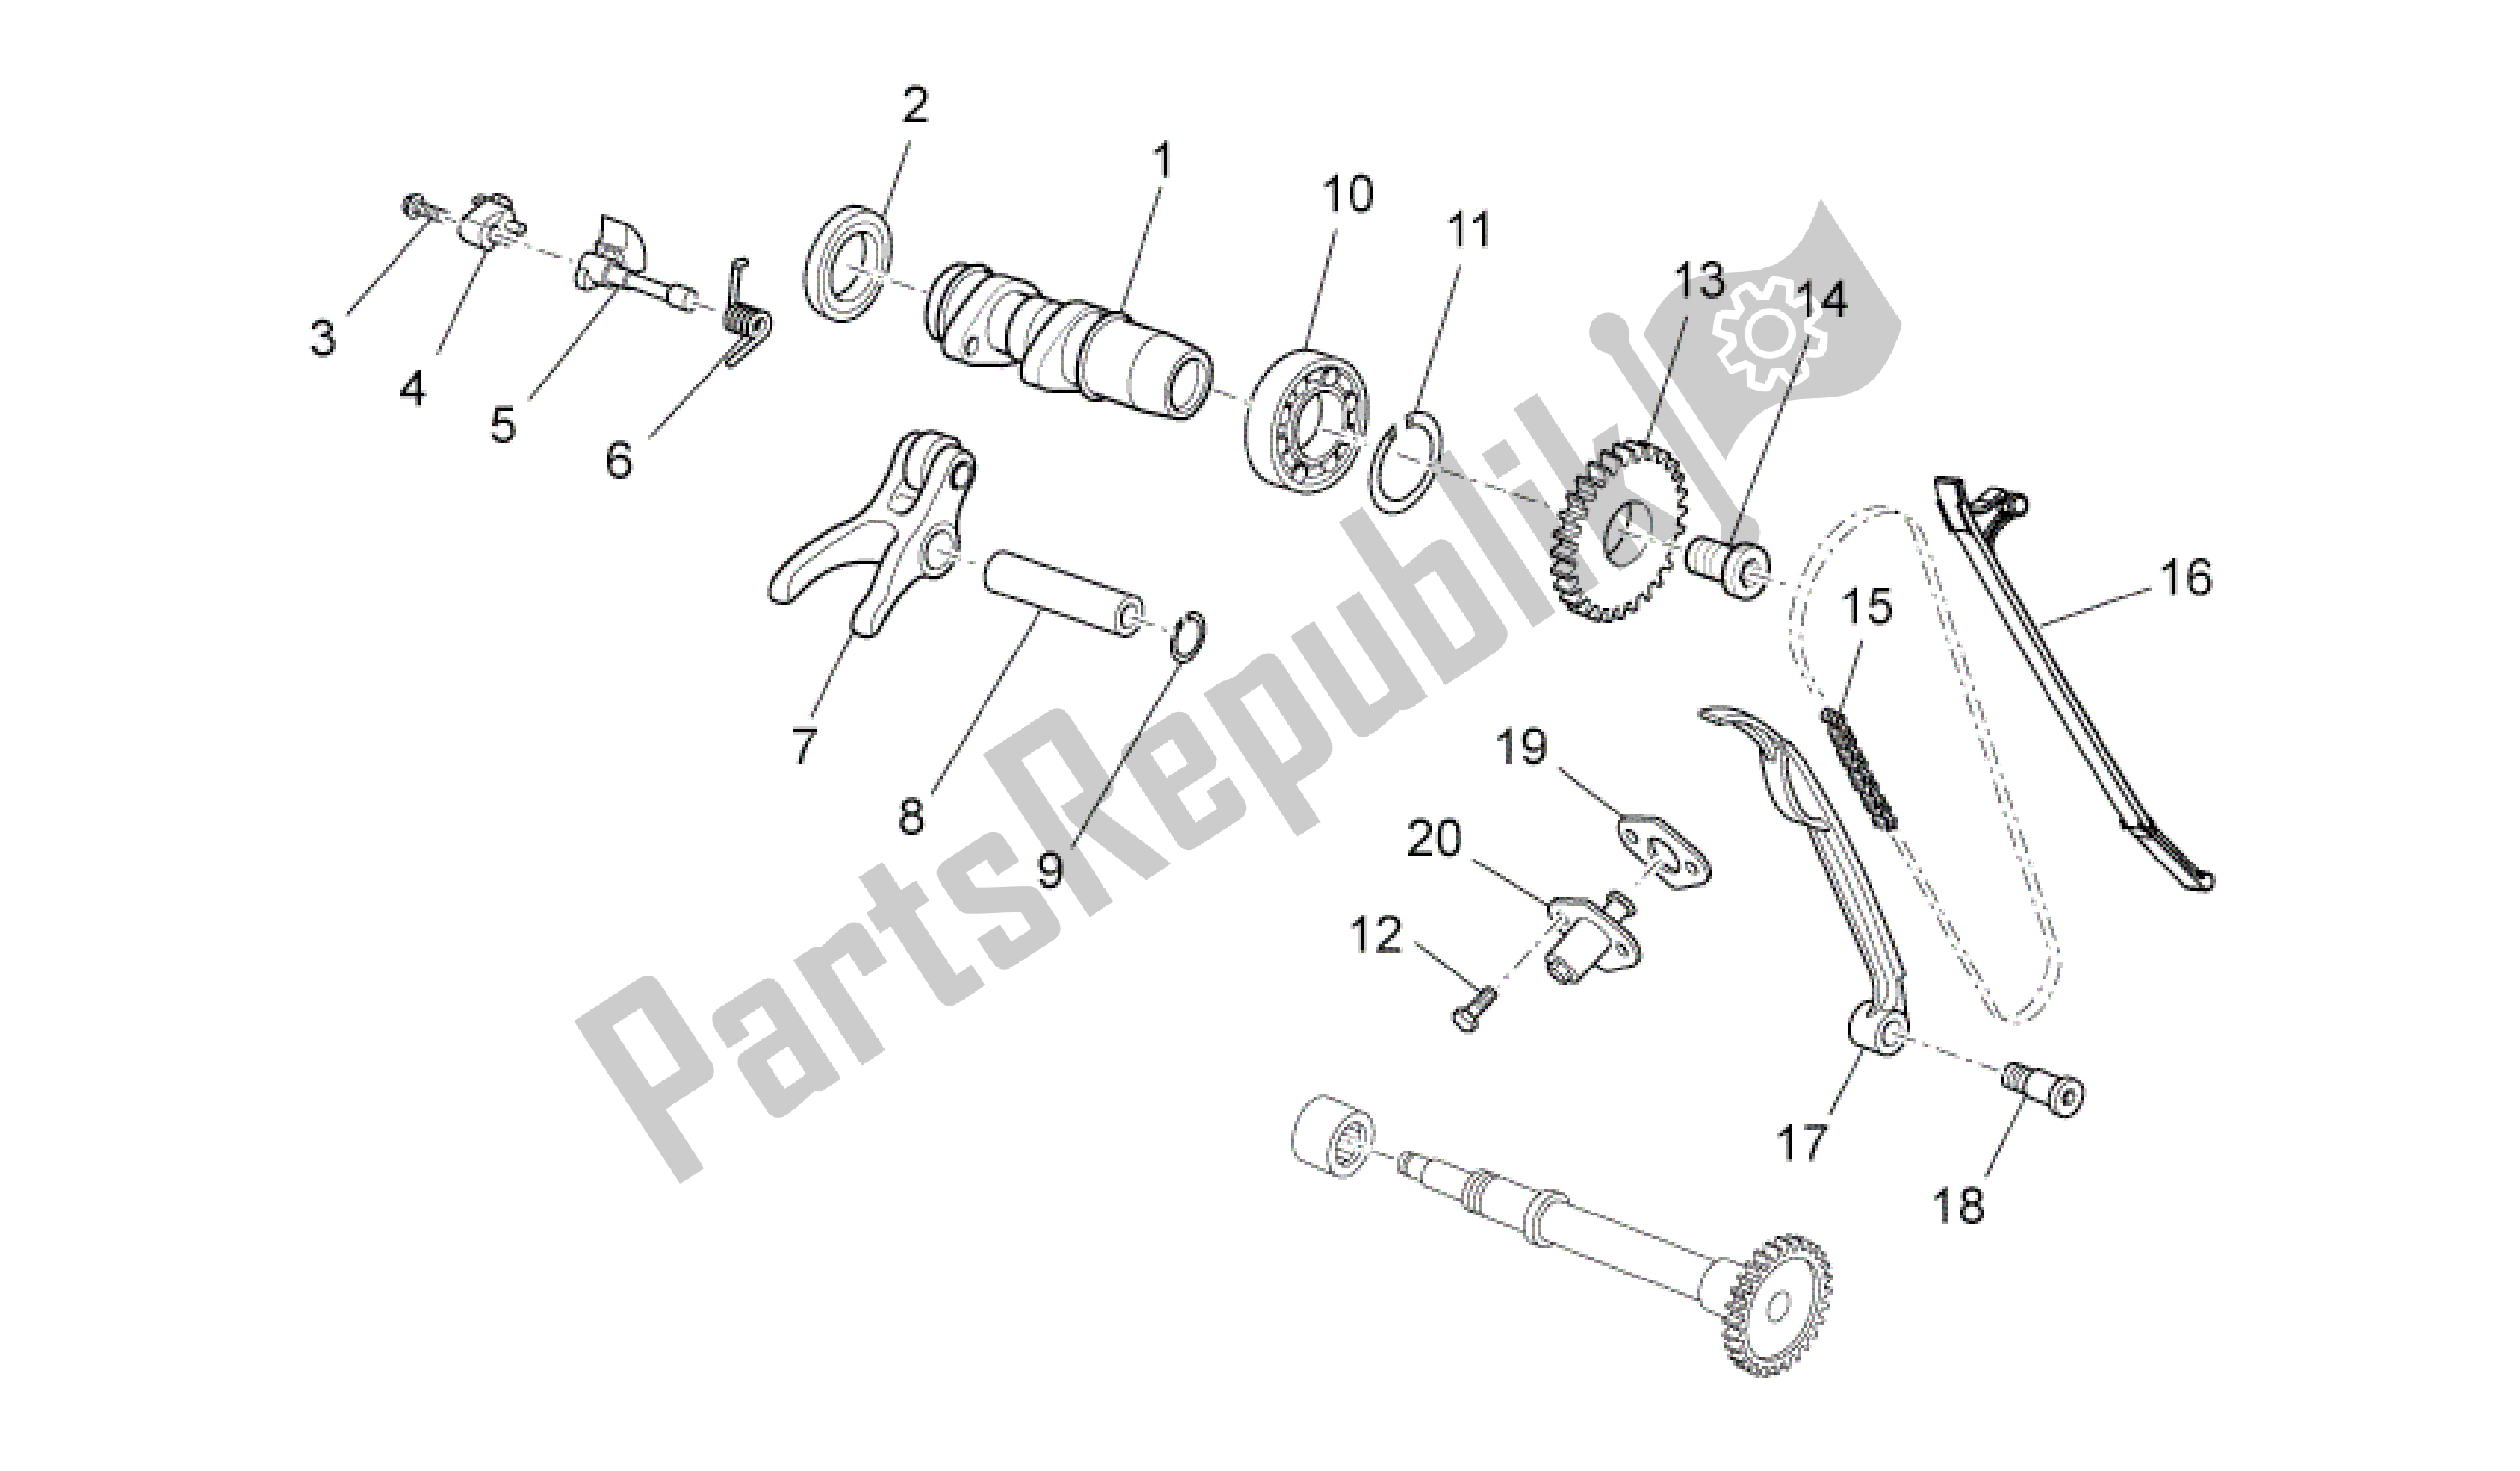 All parts for the Front Cylinder Timing System of the Aprilia MXV 450 2008 - 2010